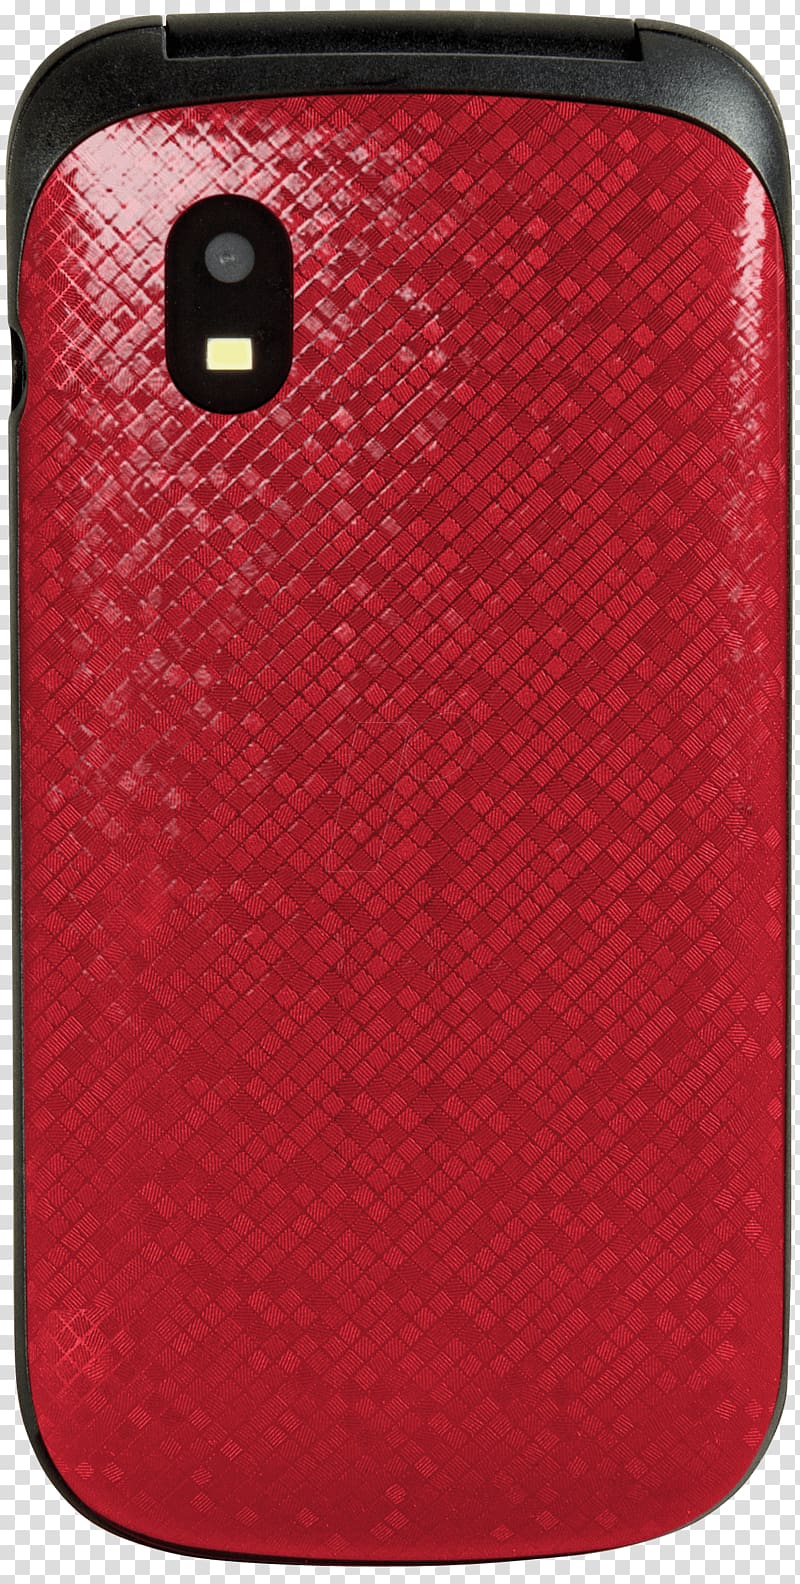 rot Mobile Phone Accessories swisstone SC 330 Flip top mobile phone, tone transparent background PNG clipart